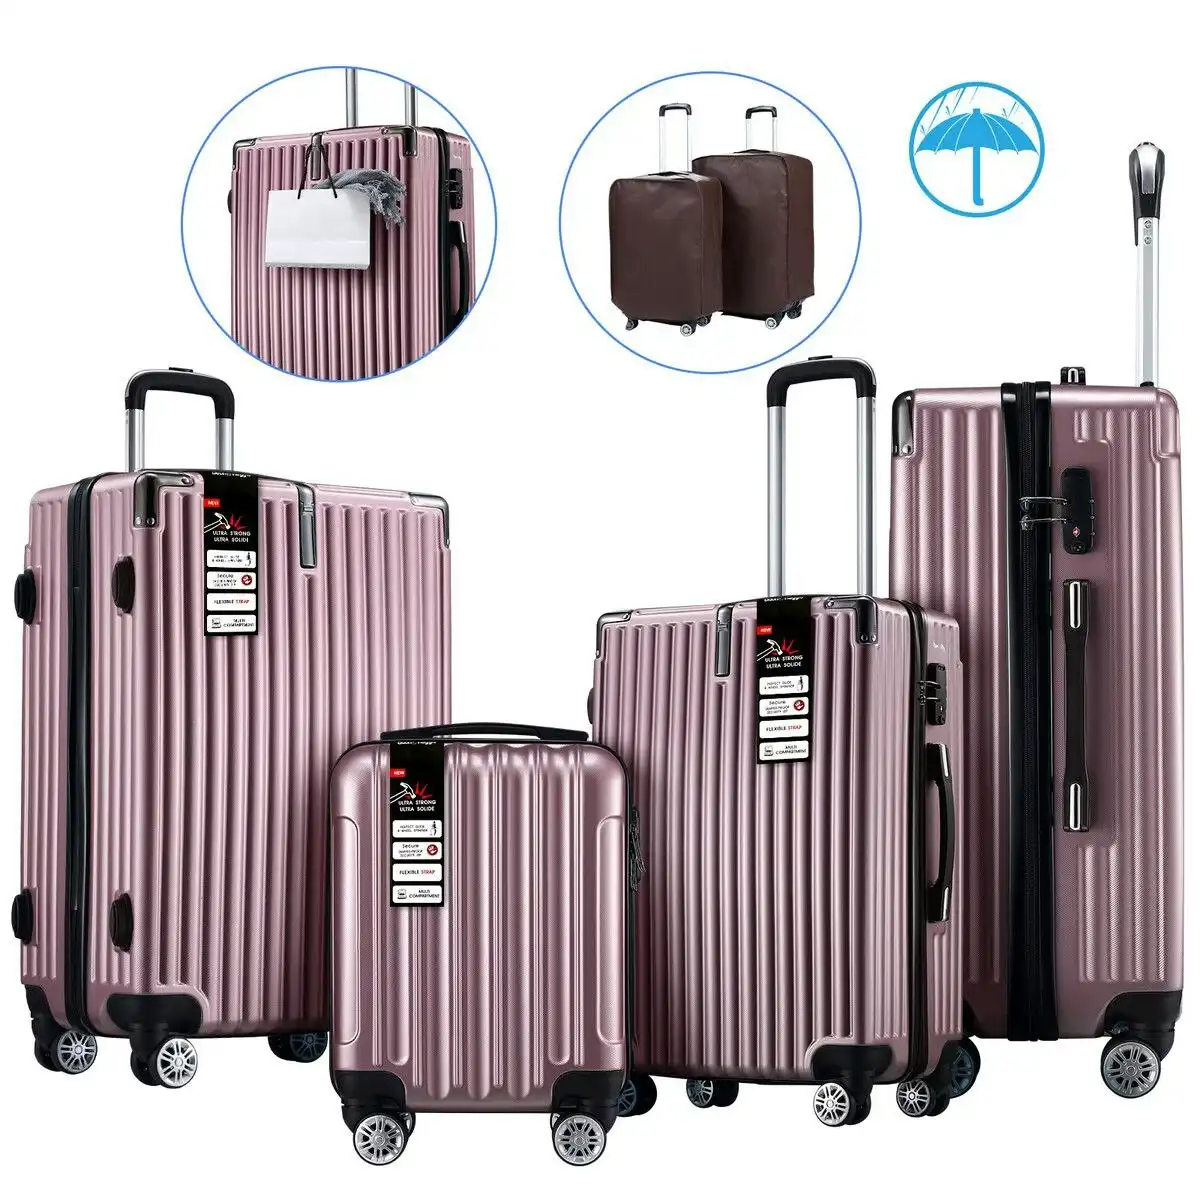 Ausway 4 Piece Luggage Set Carry On Traveller Suitcases Hard Shell Rolling Trolley Checked Bag TSA Lock Front Hook Lightweight Rose Gold